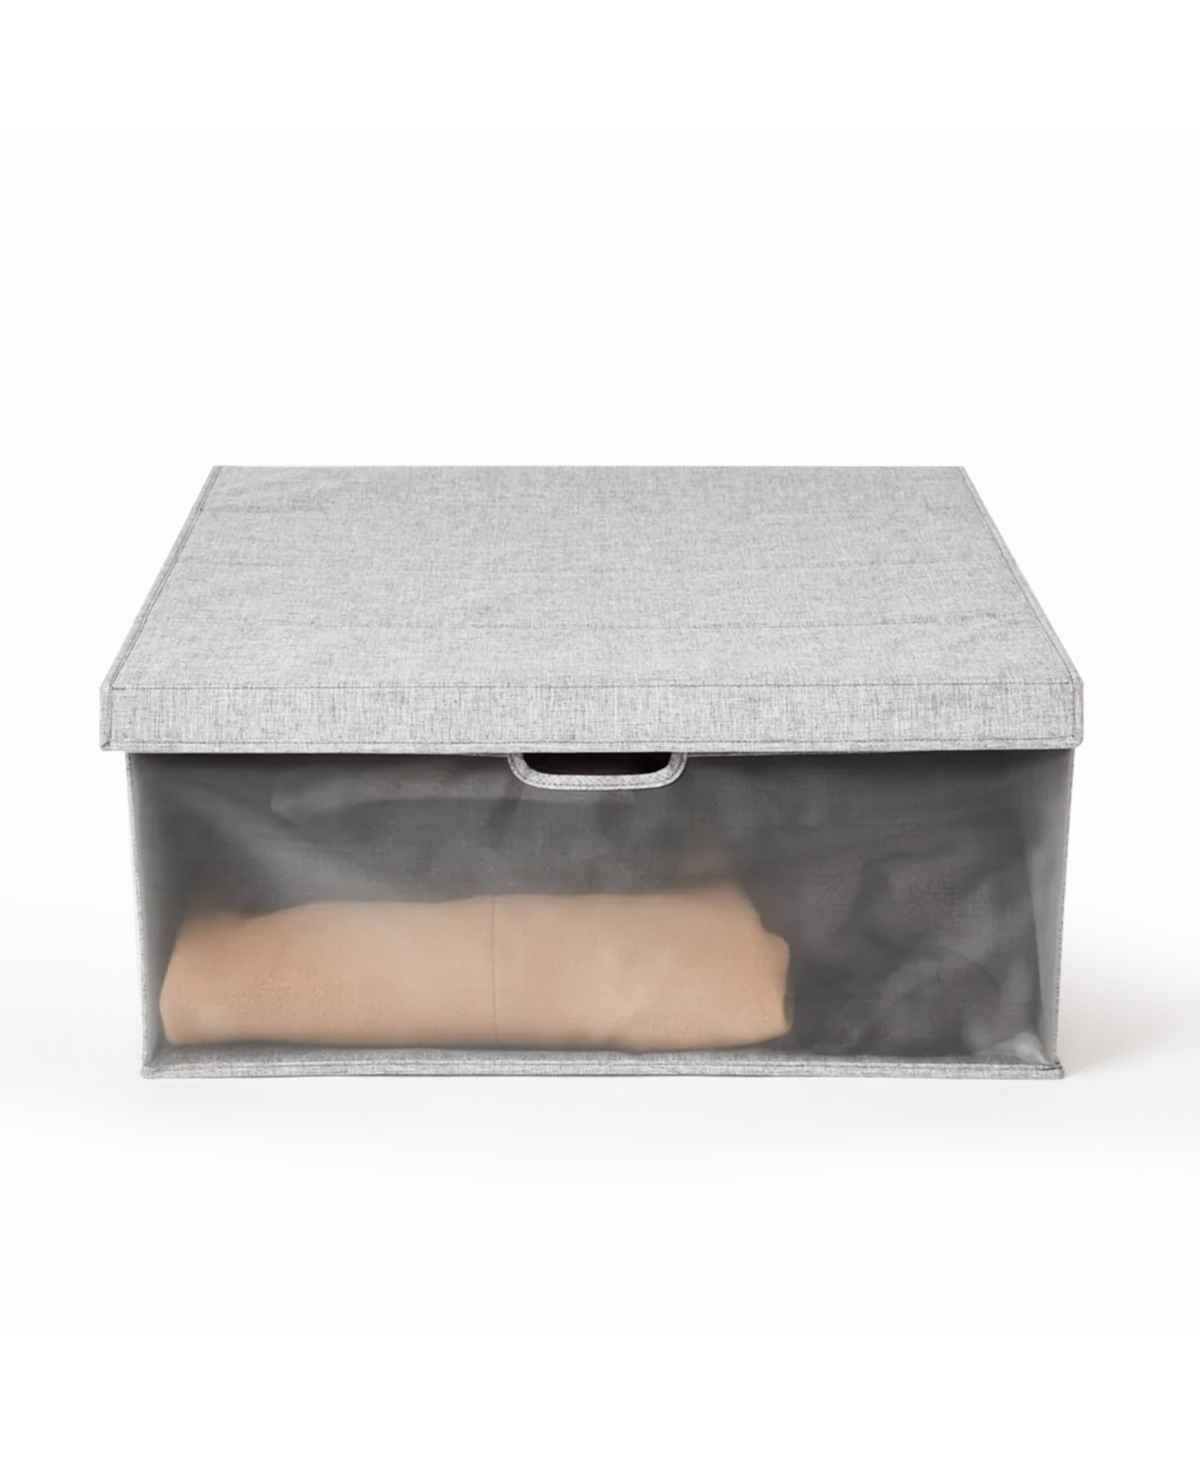 Under the Bed Collapsible Storage Box, Versatile and Convenient - Grey